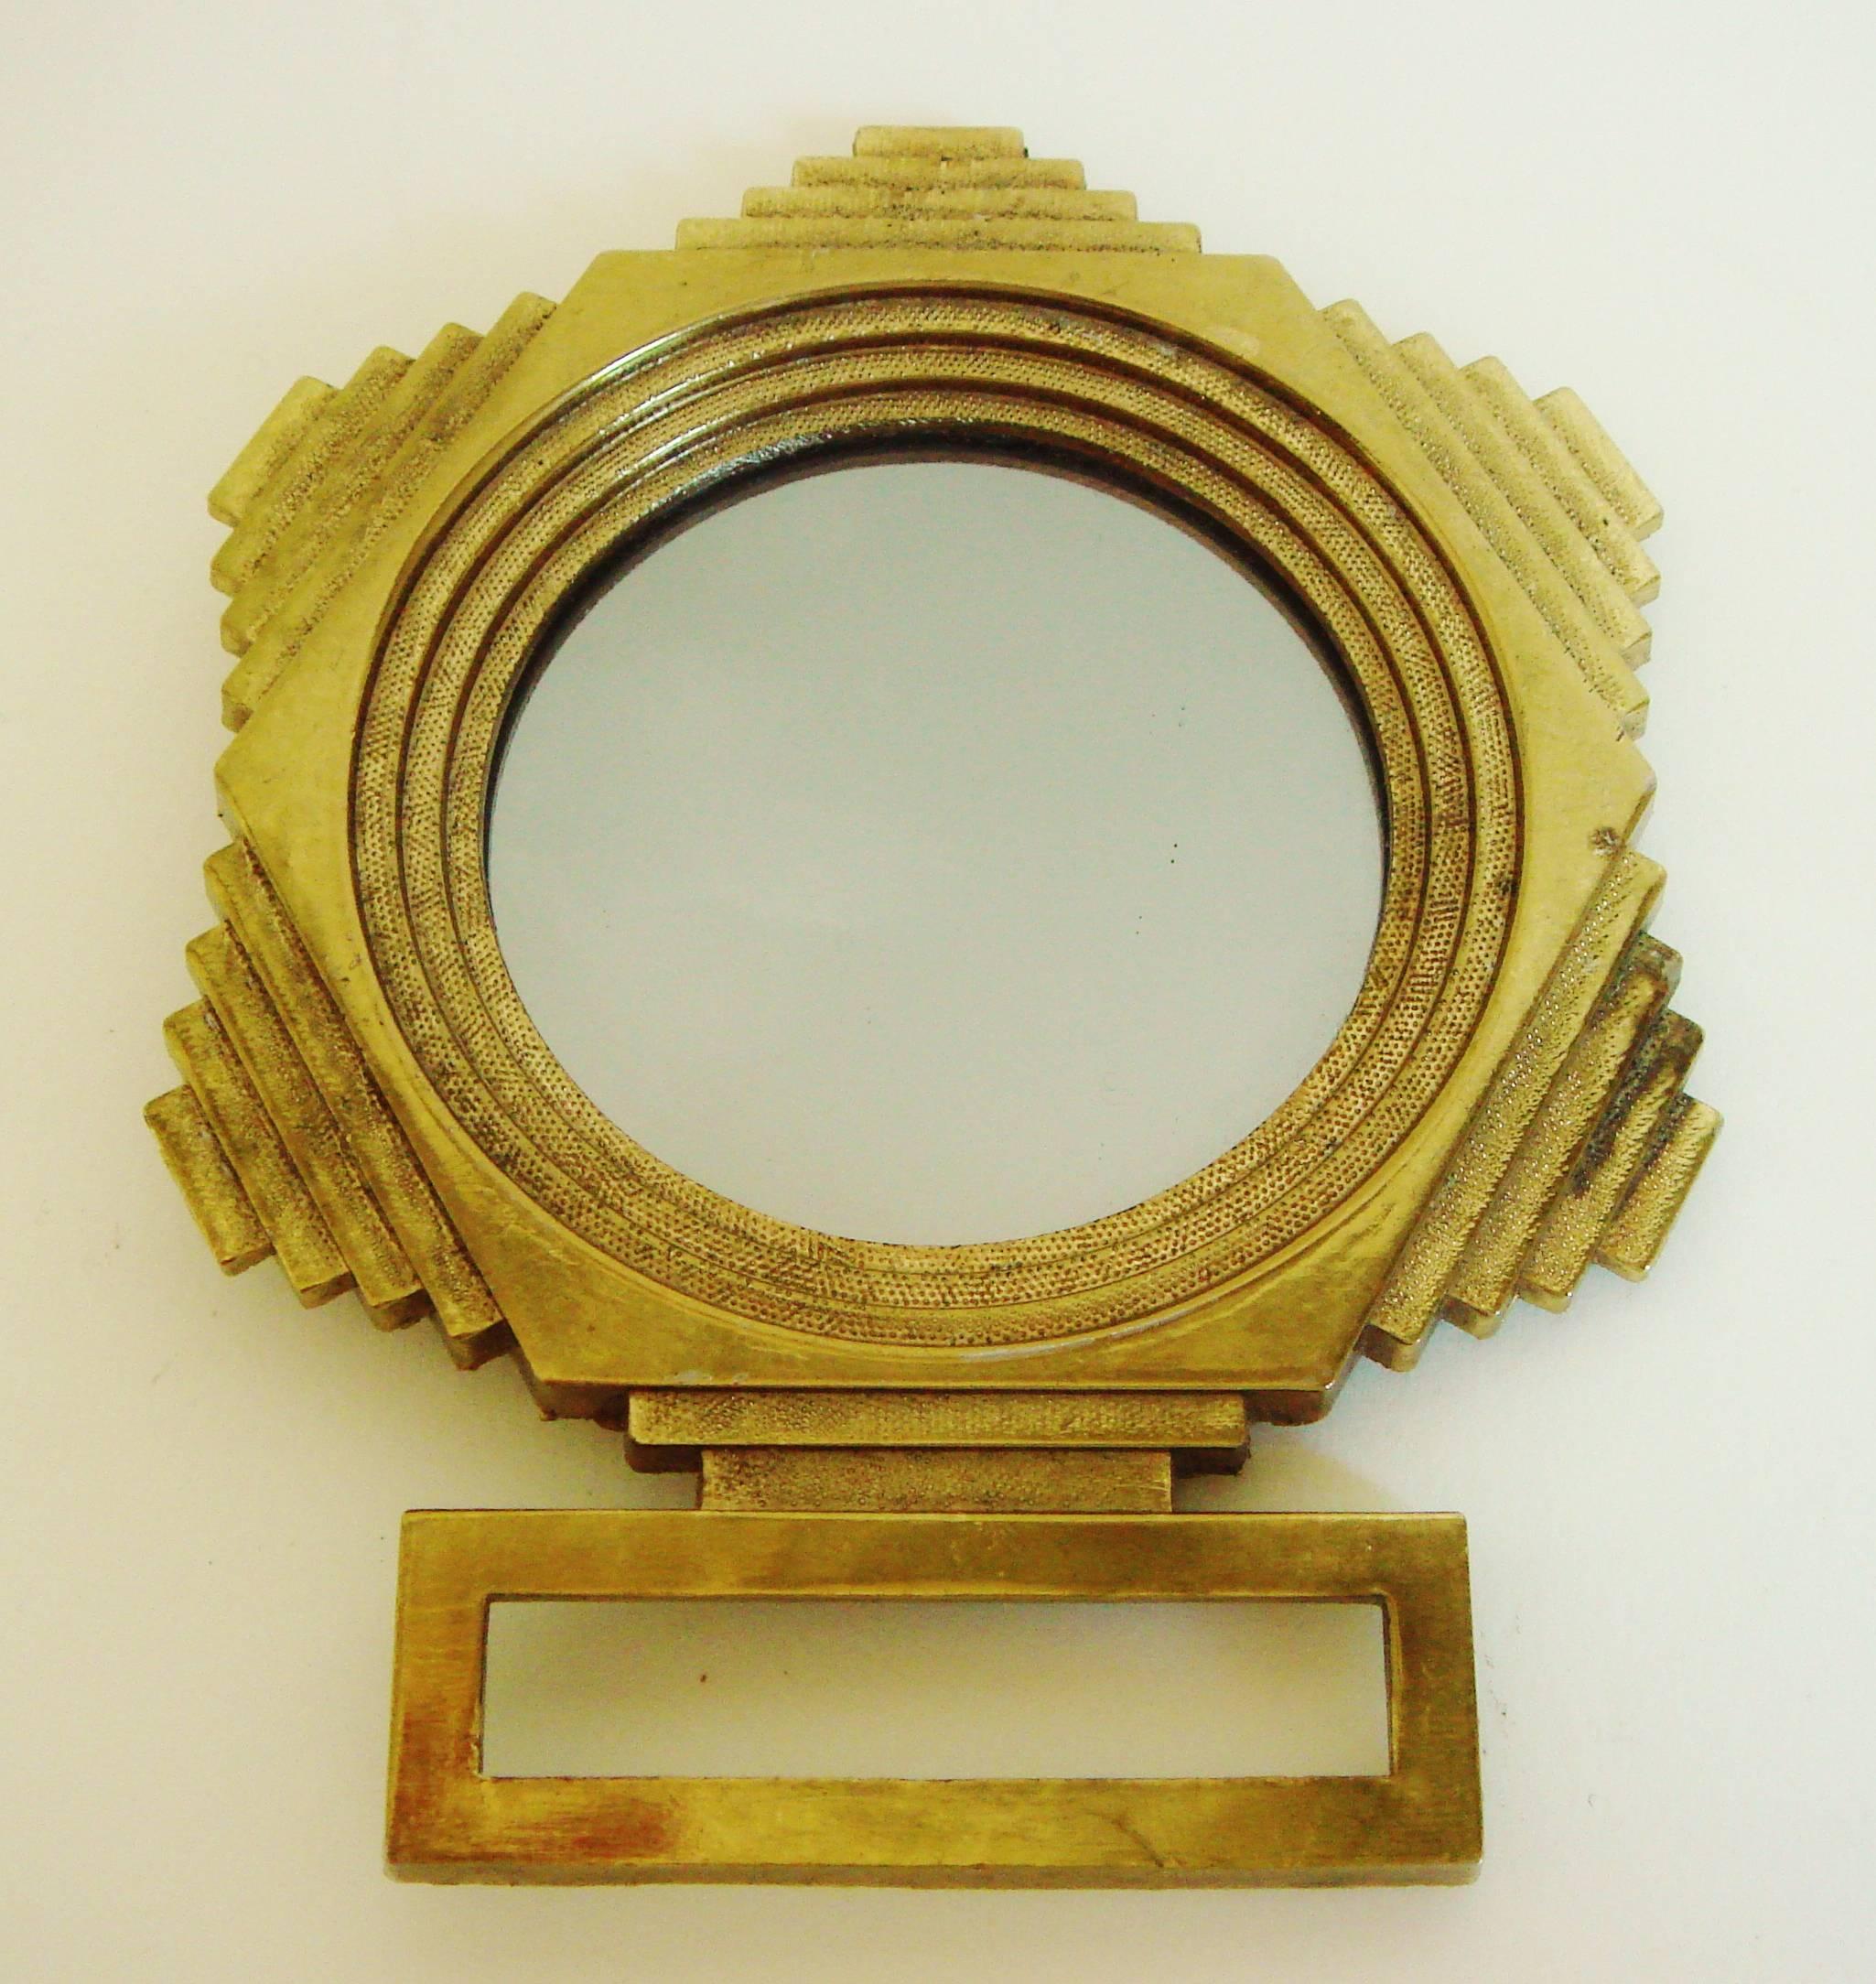 The mechanism for this rare pattern American Art Deco front door peep-hole was designed by the famed US Government Photographer, George W. Ackerman (1884-1962) and patented in 1930. The peephole frame on both sides of the door is in solid brass and